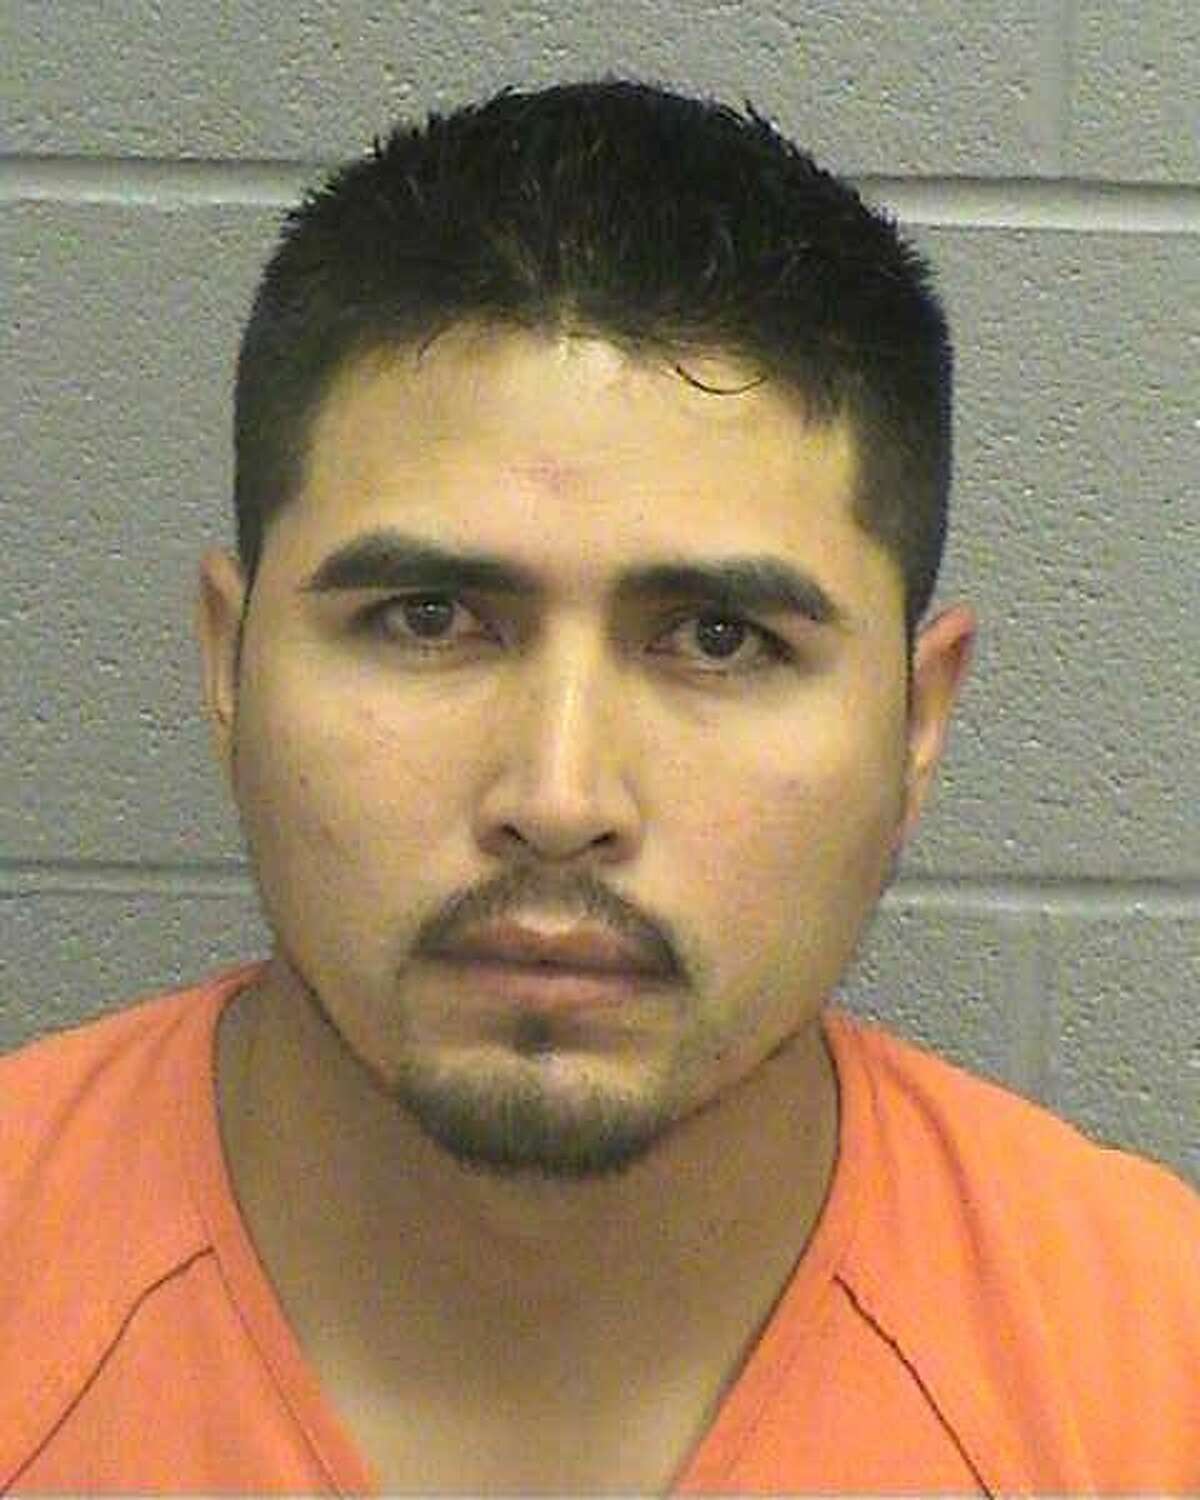 FUGITIVE:  Rene Luna is wanted on a warrant for sexual assault.